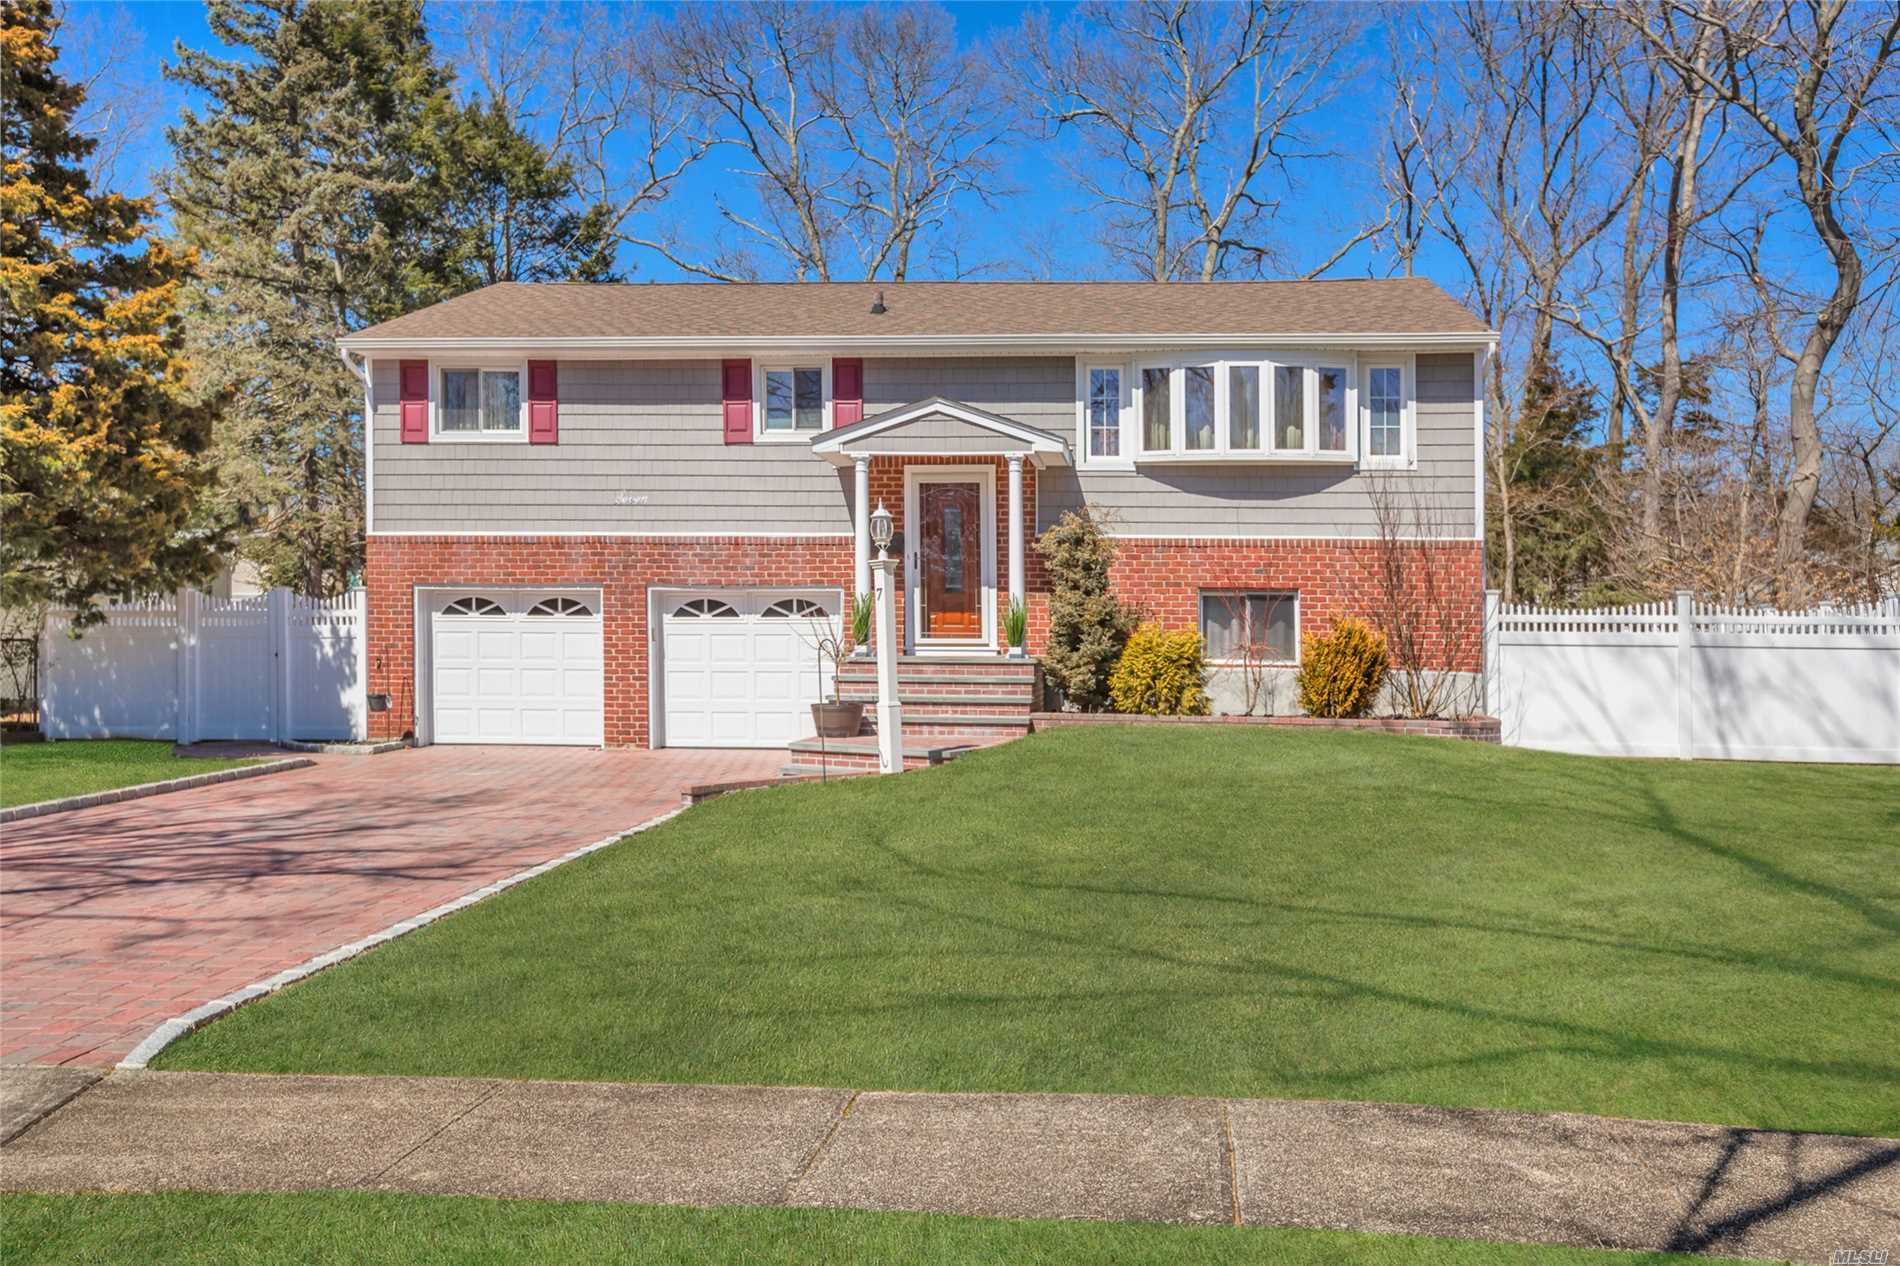 Smithtown. Beautiful Curb Appeal In This Stunning Hi Ranch, Updated Kitchen With Stainless Steel Appliances, 4 Bedrooms, New Bathrooms, Hardwood Floors ***BRAND NEW Beautiful Paved Driveway/Walkway/Siding/Deck/Fencing/Sprinkers*** Updated Electric, 2 Car Garage, Possible Mother/Daughter W/Permits, A Truly A Must See!!!